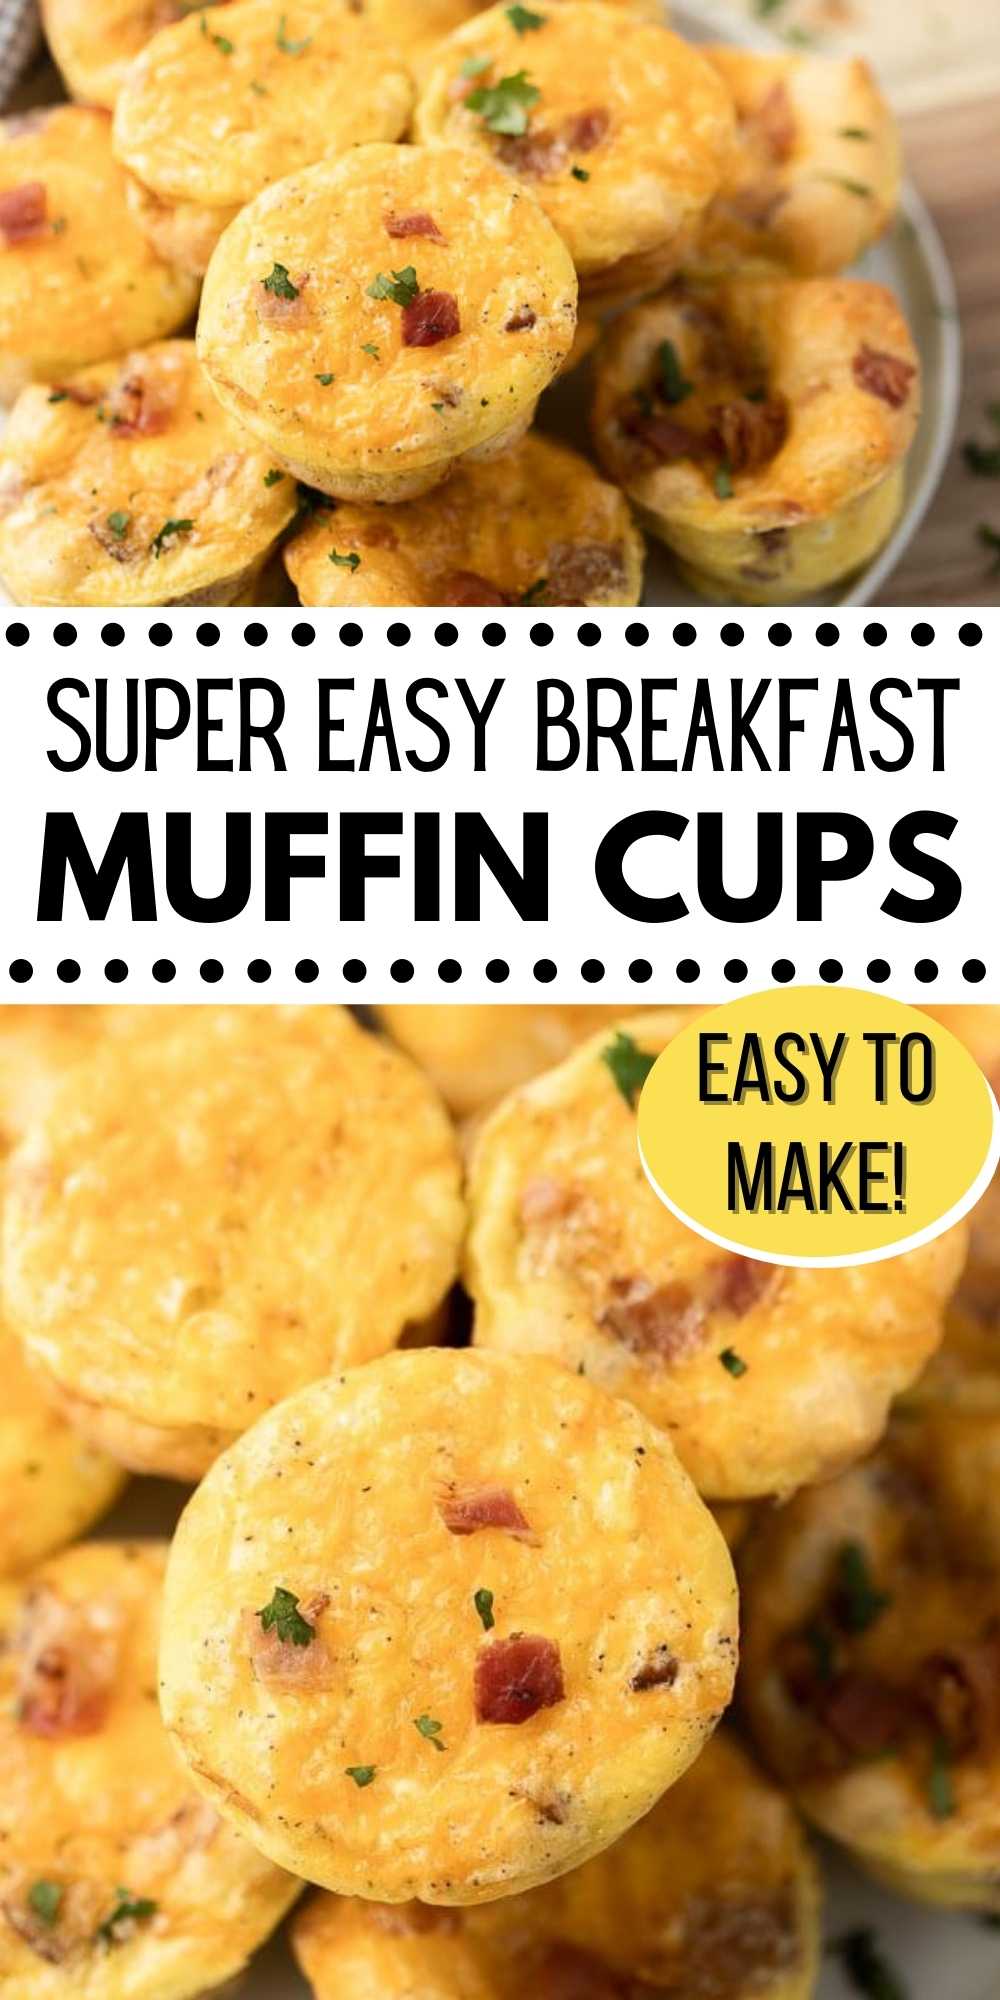 Enjoy Breakfast egg muffins for a hearty breakfast that is quick and perfect on the go. These muffin cups are so easy to customize and tasty.